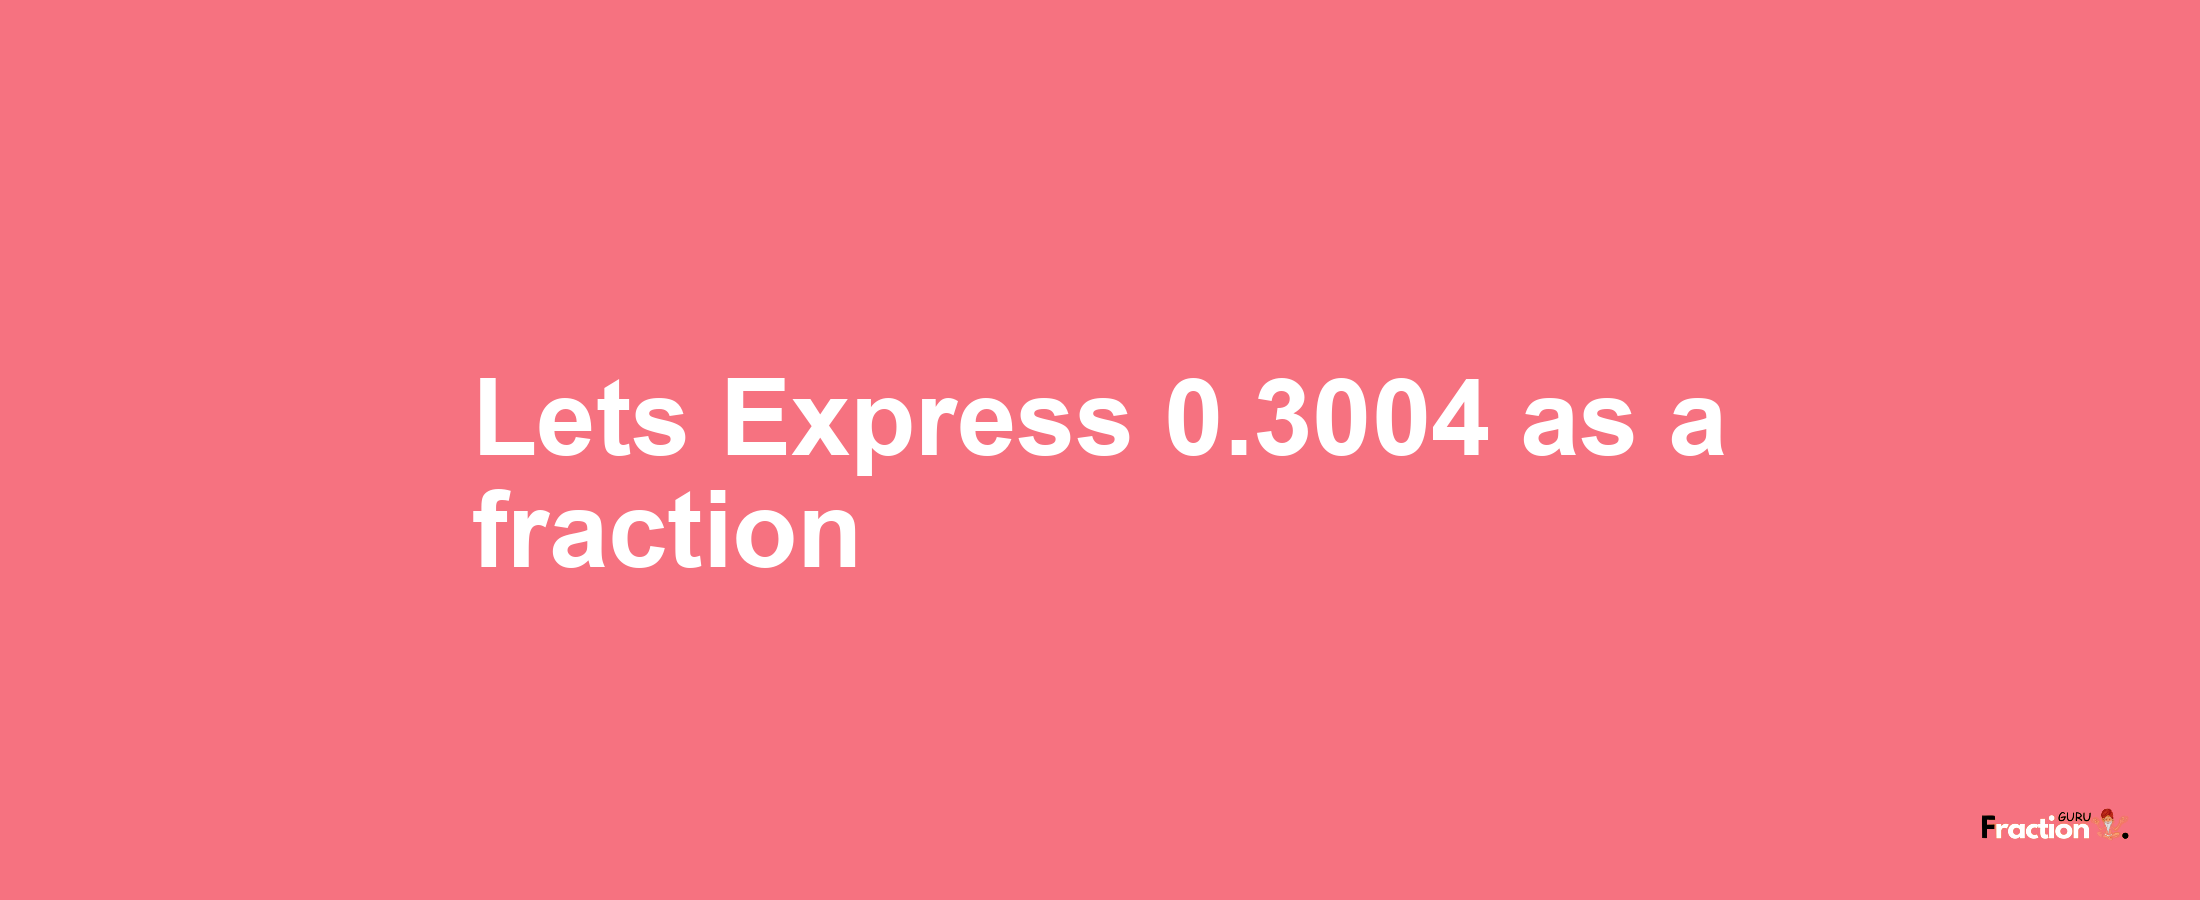 Lets Express 0.3004 as afraction